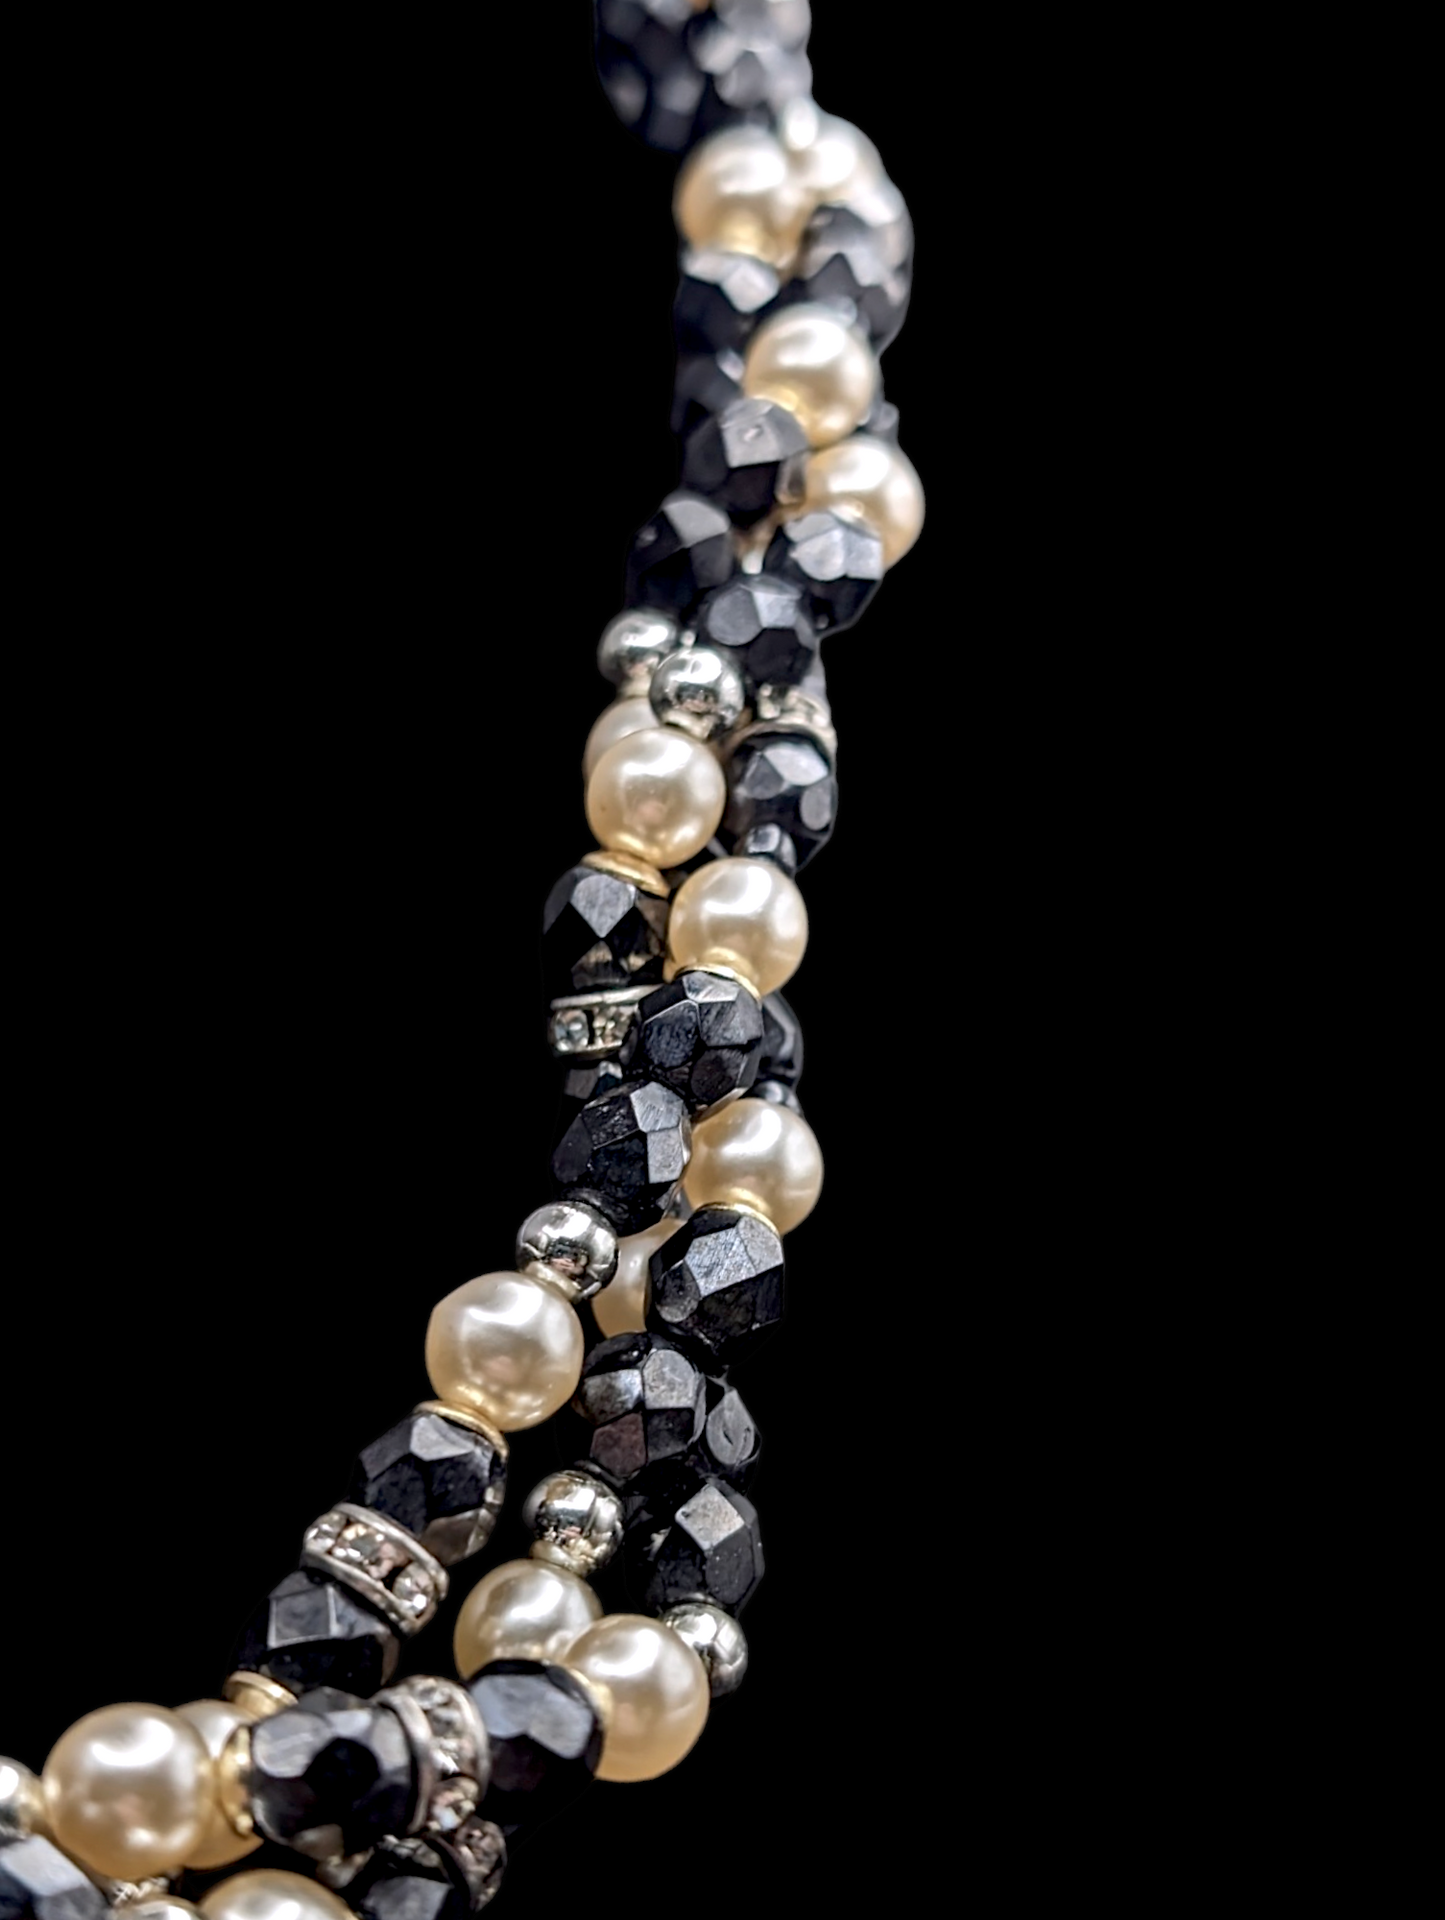 1950s 3 Strand Pearl, Black Faceted, and Silver Bead Necklace